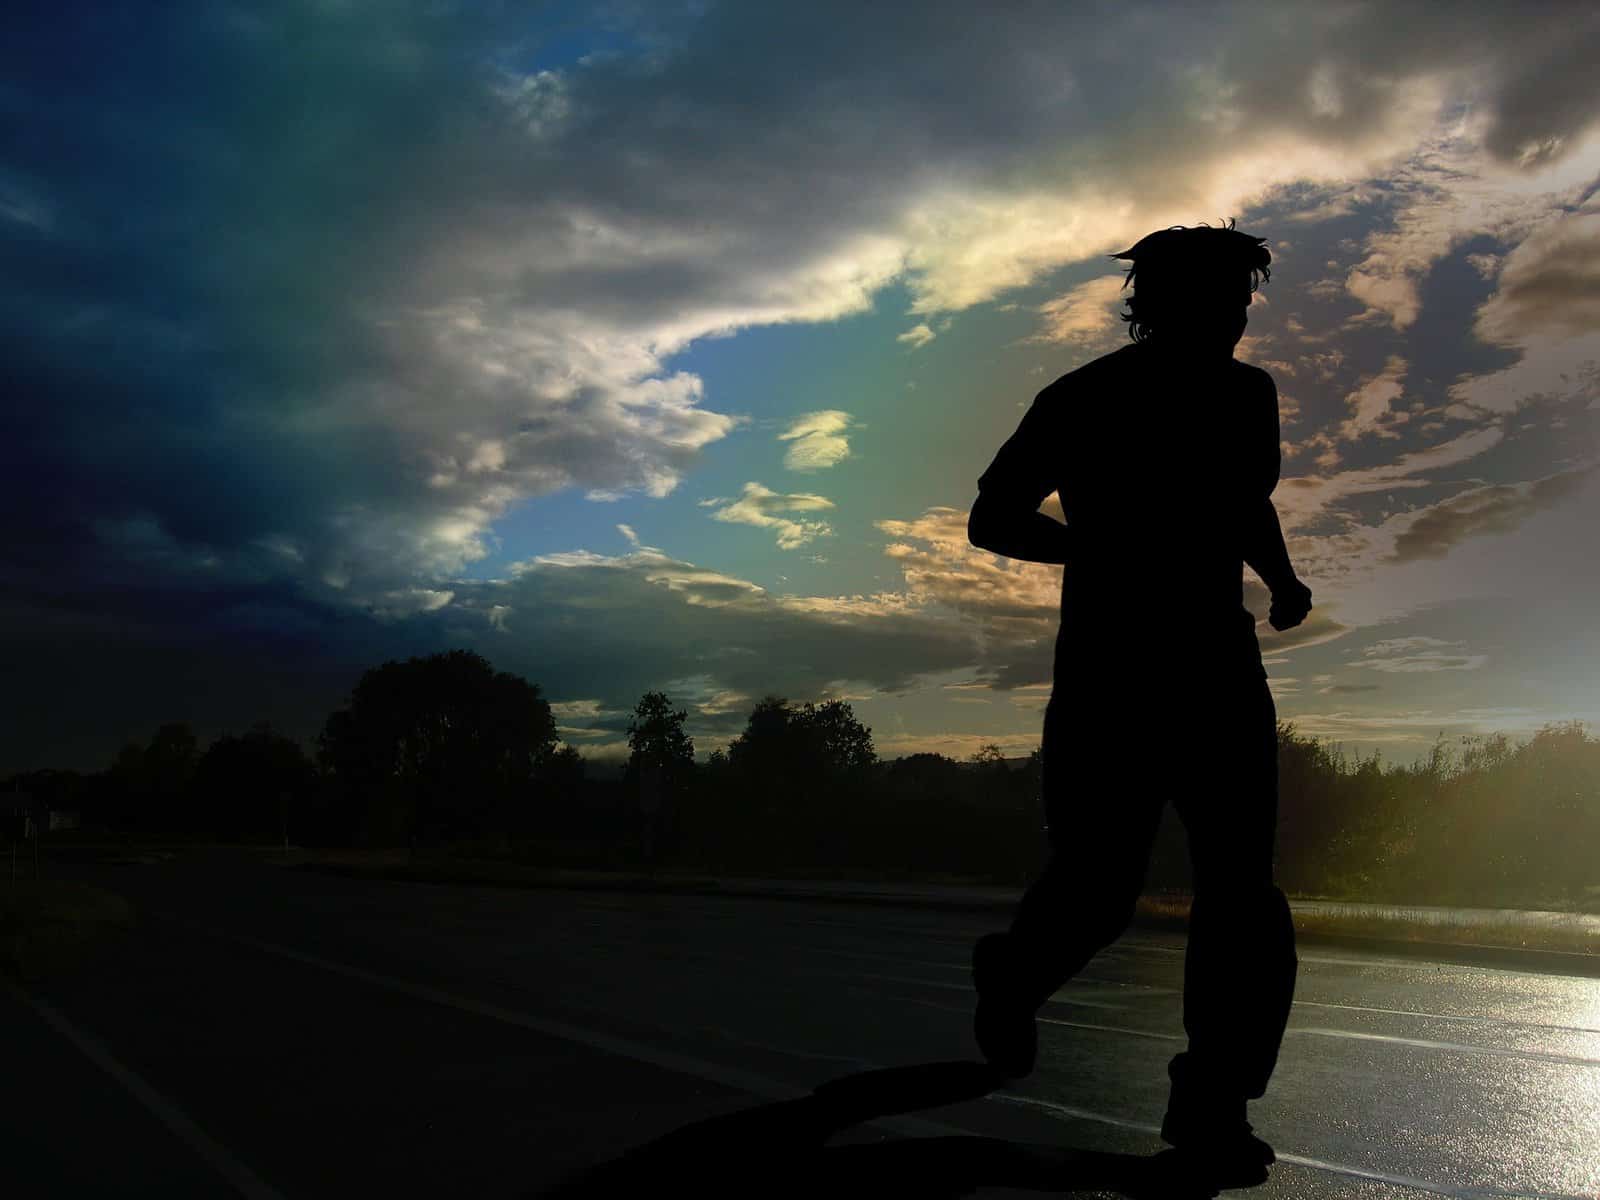 A person, possibly male, is shown in silhouette in a running posture.